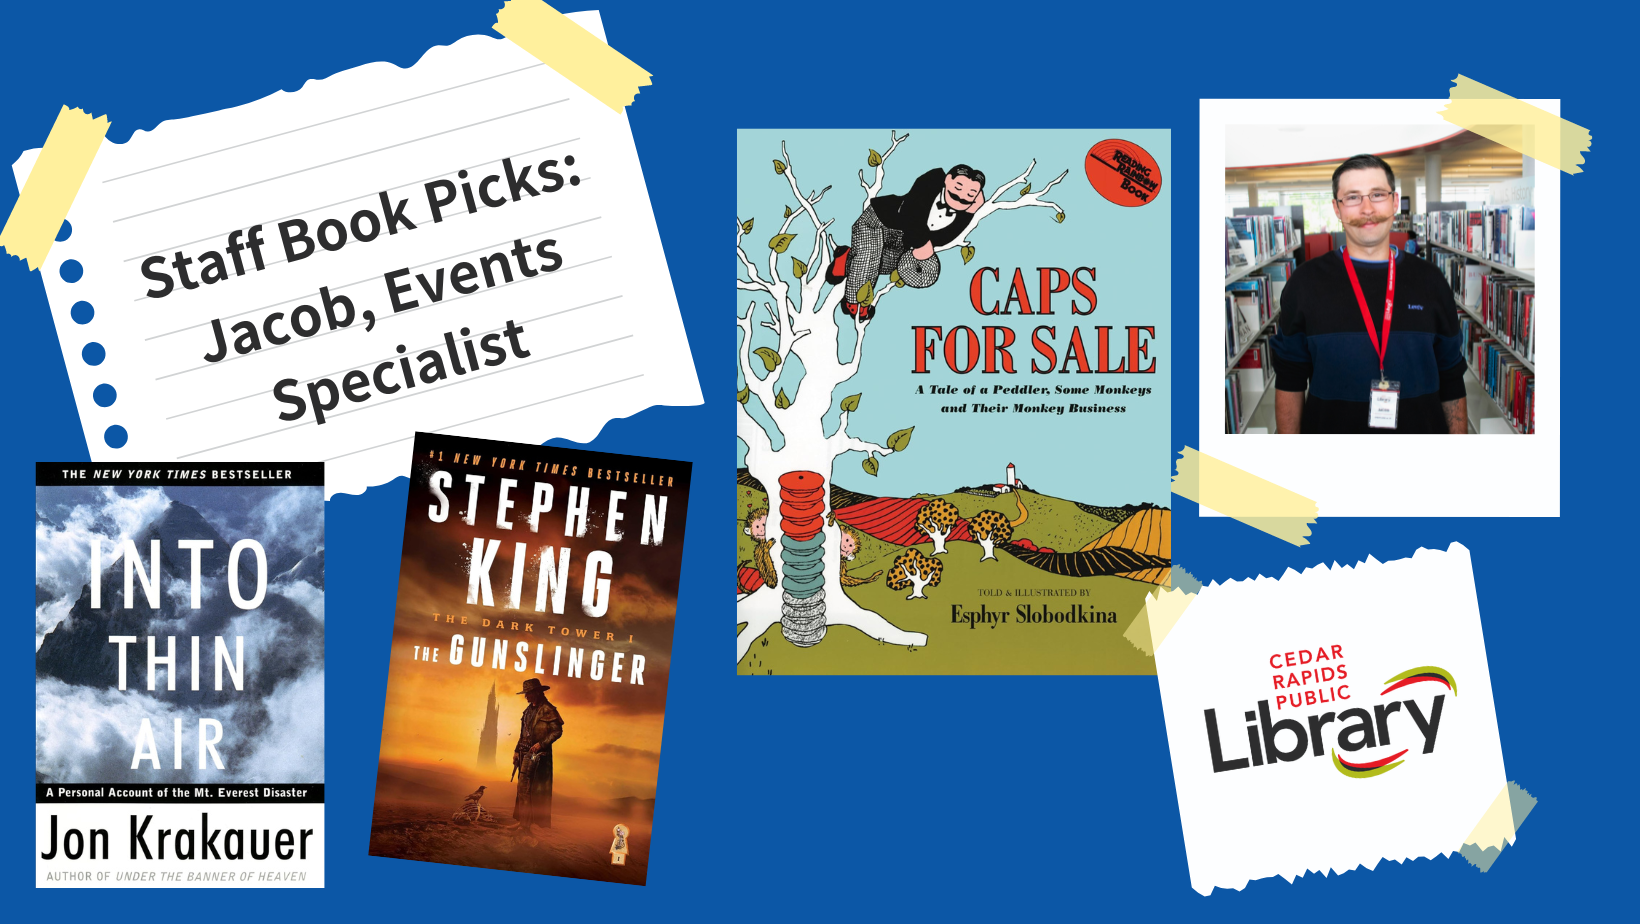 A graphic says "Staff Book Picks: Jacob, Events Specialist" with a photo of Lexi and three book covers: "Into Thin Air," "The Gunslinger," and "Caps for Sale."